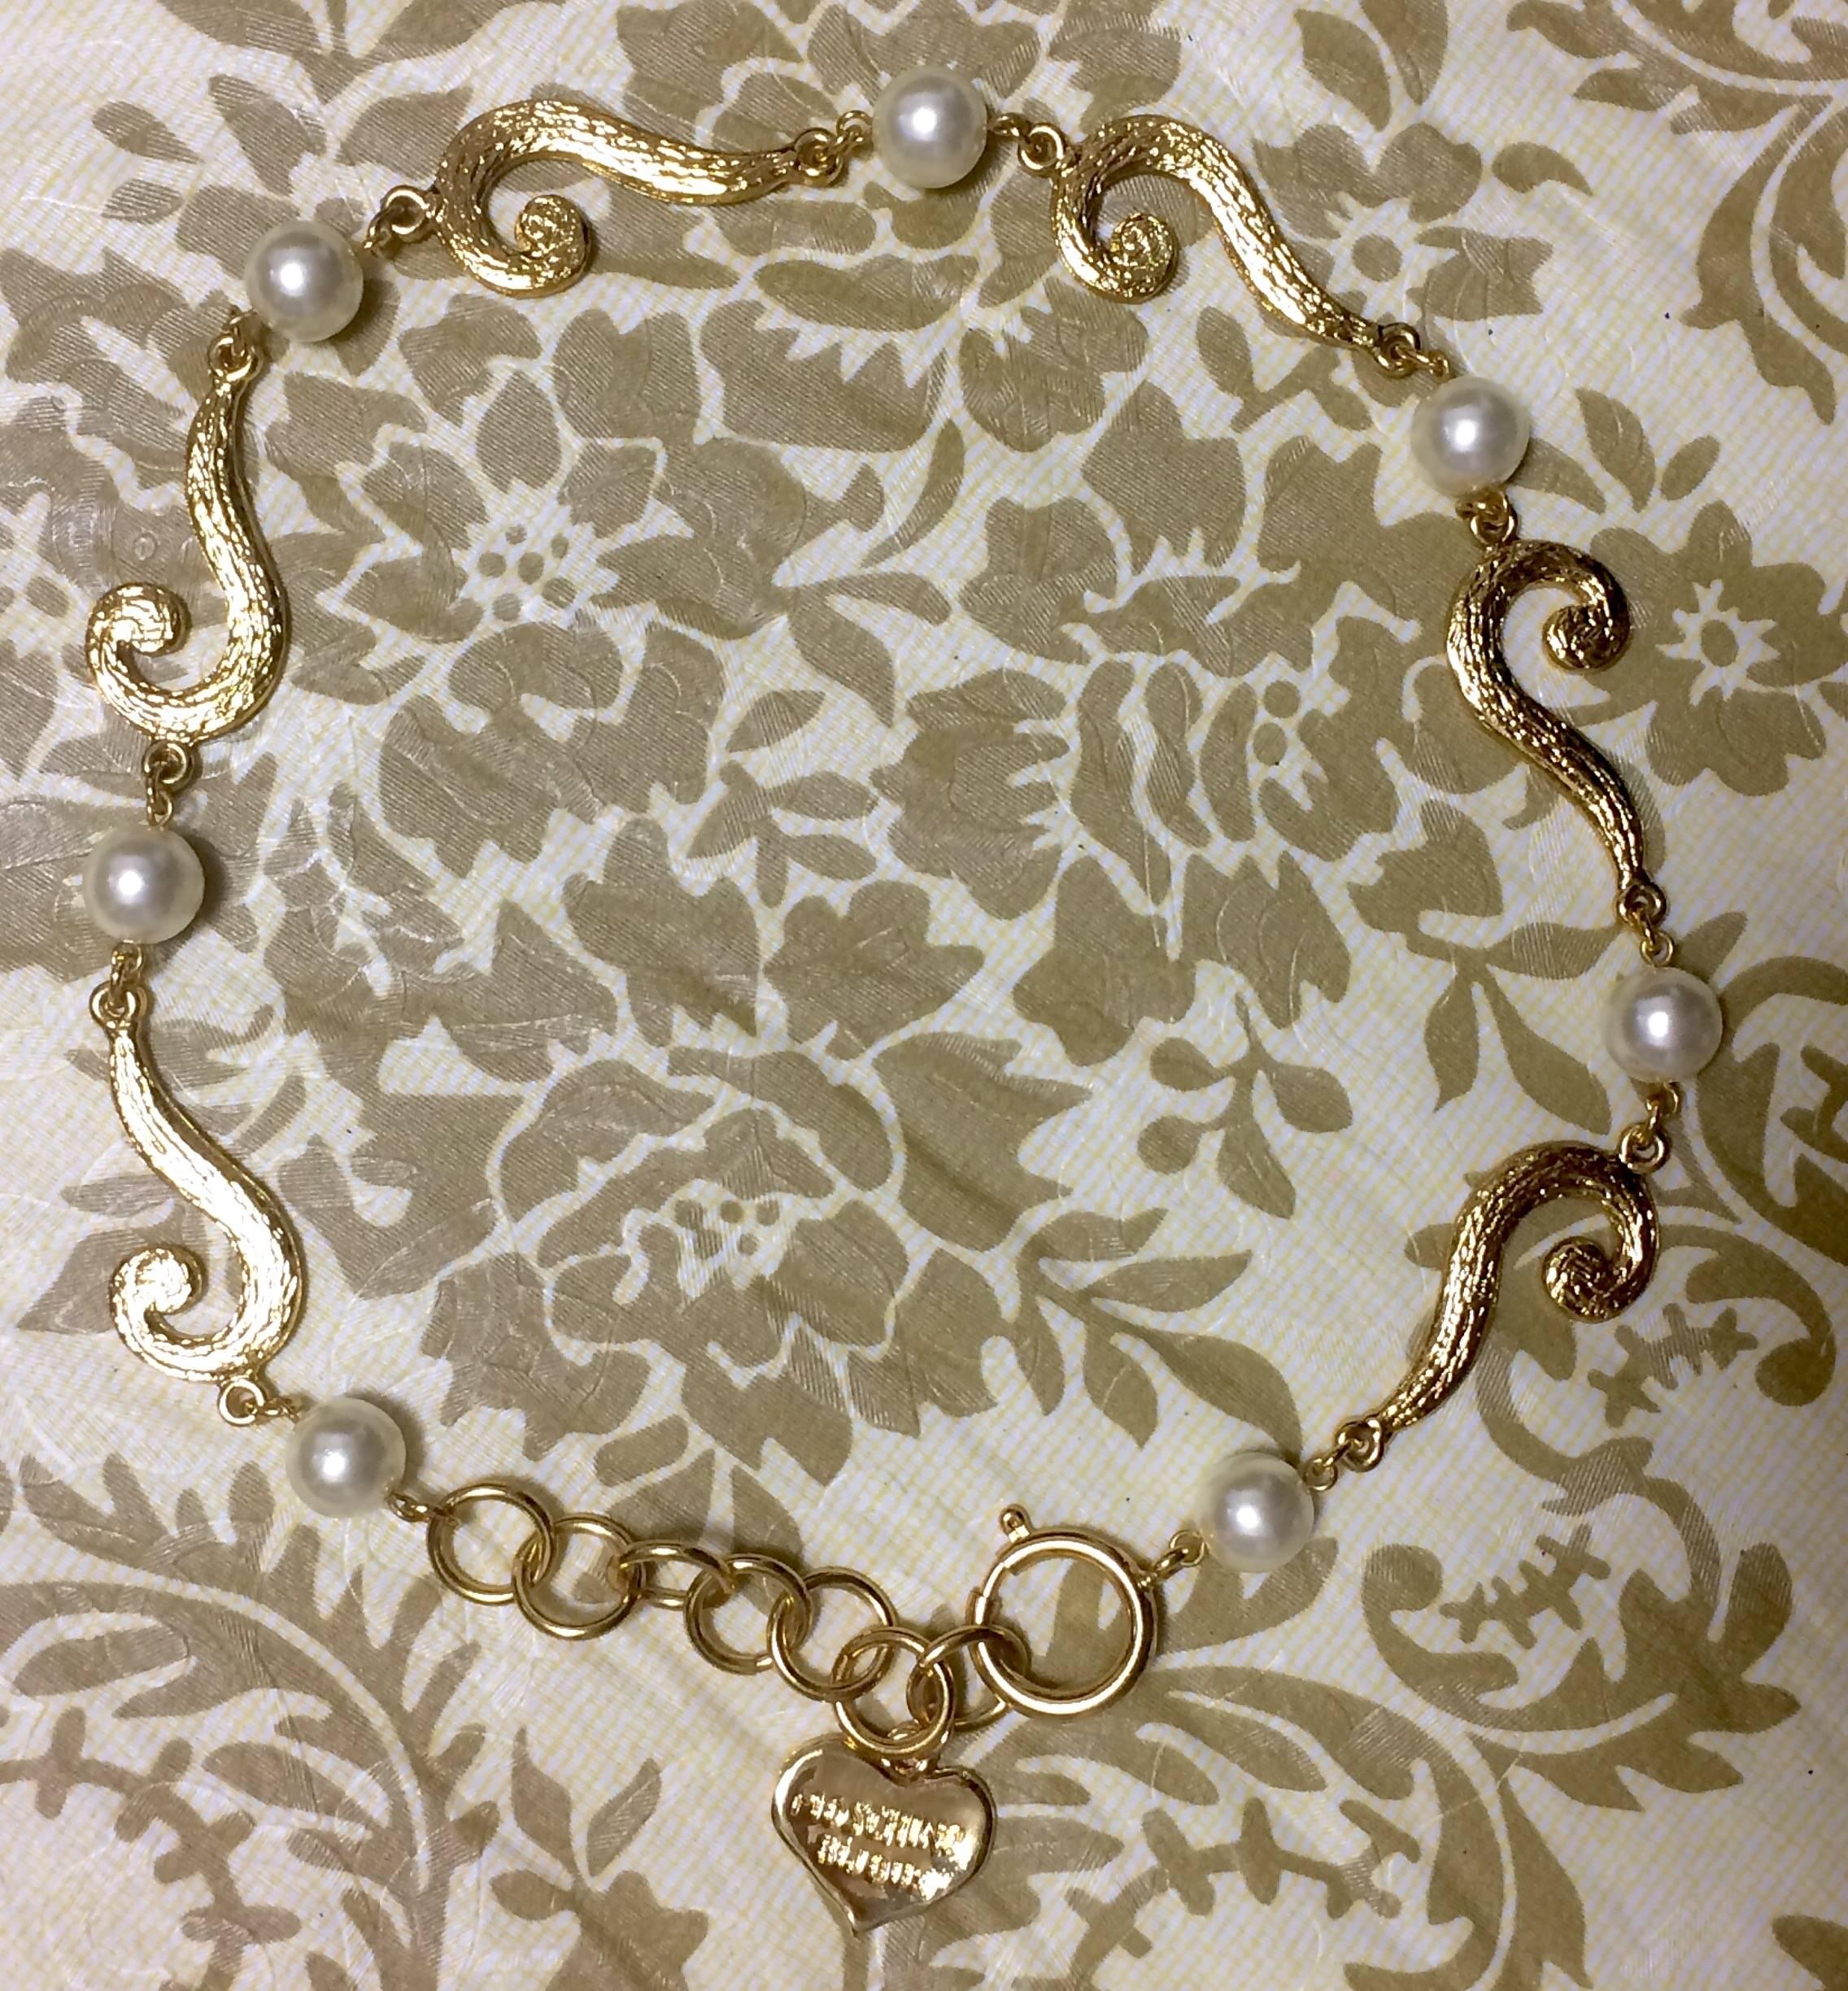 1990s. MINT. Vintage Moschino chain statement necklace with golden question marks and white faux pearl balls. Rare and unique jewelry.

Introducing another rare and fabulous jewelry necklace from MOSCHINO back in the 90's.

It is a gorgeous chain